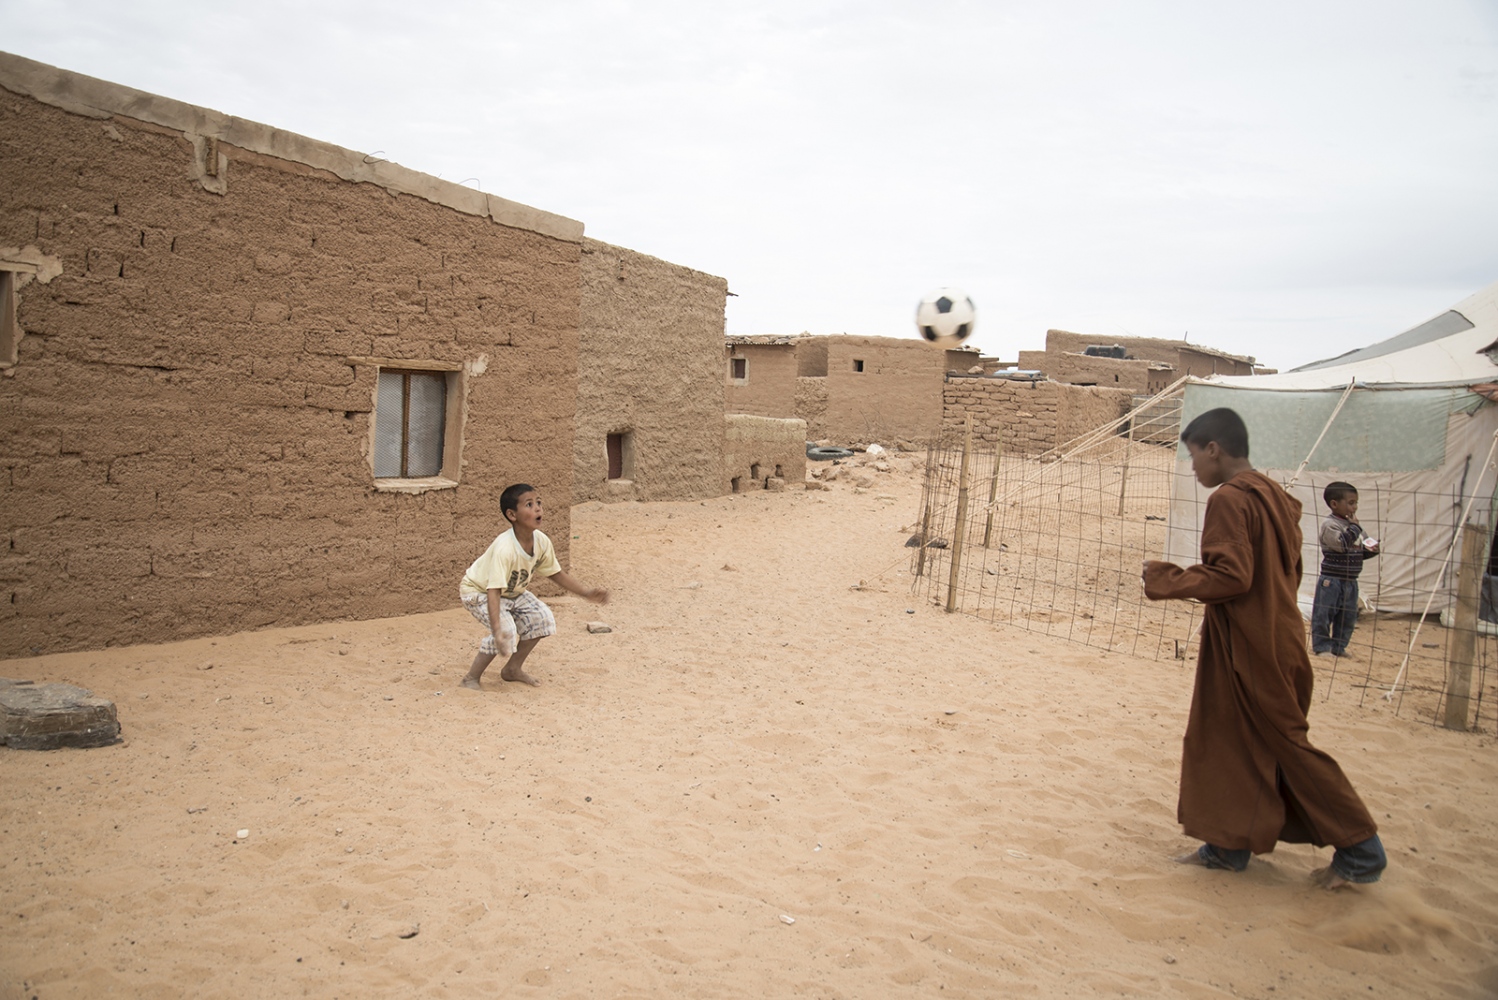 Behind The Wall, life of the Sahrawi -  Kids playing soccer with a goal made of stones. The boy...